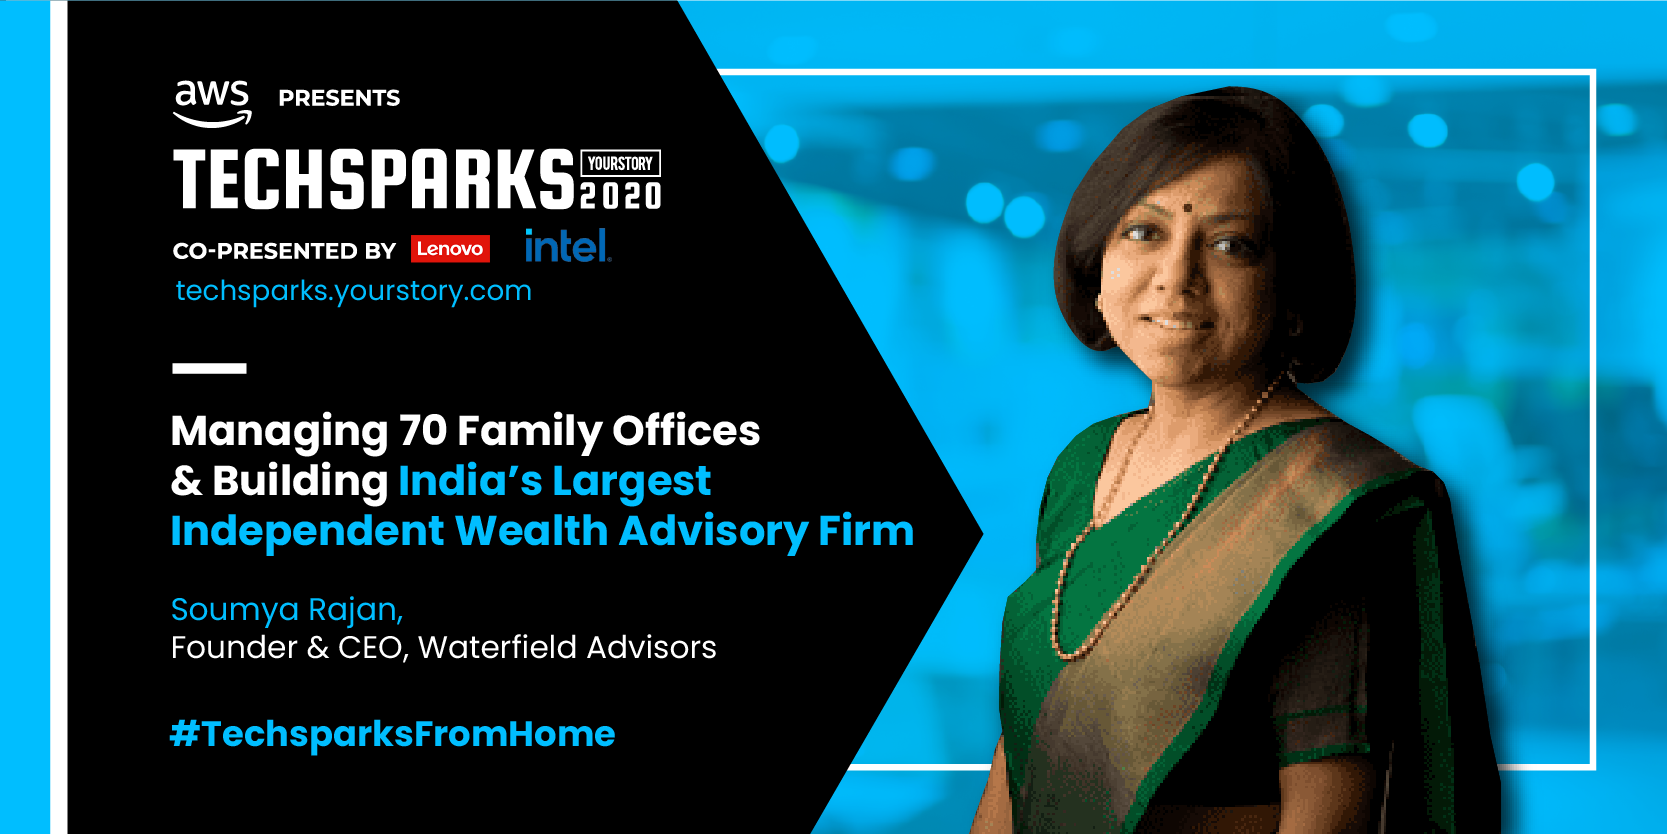 [TechSparks 2020] Soumya Rajan of Waterfield Advisors on guiding Indian family offices to sustainable wealth creation